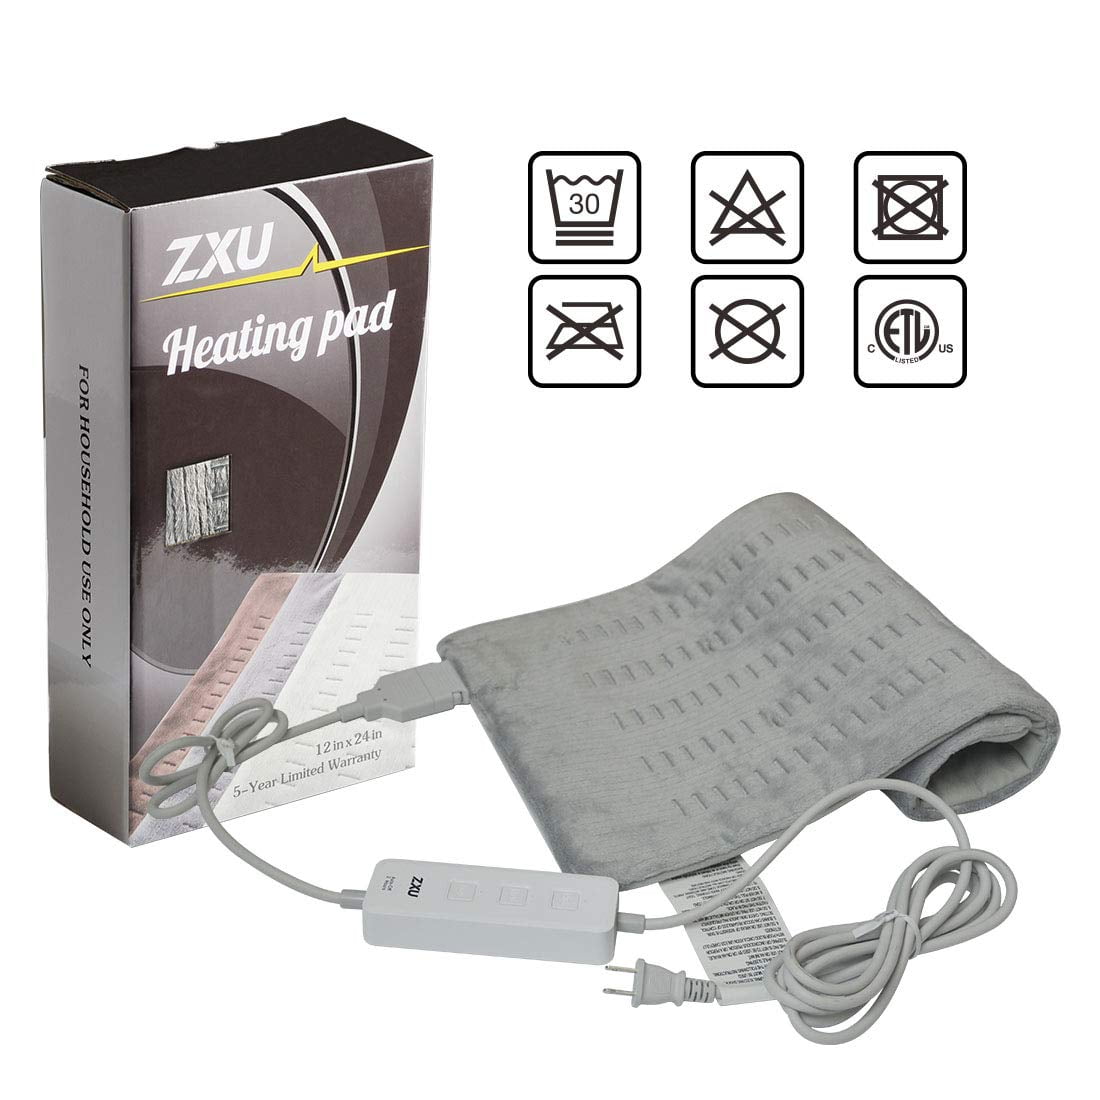 Zxu Qh 12 X 24 Fast Heat Electric Heating Pad Soft Heat Wrap For Pain Cramps And Muscle Soreness Relief Machine Washable With Auto Off Walmart Com Walmart Com